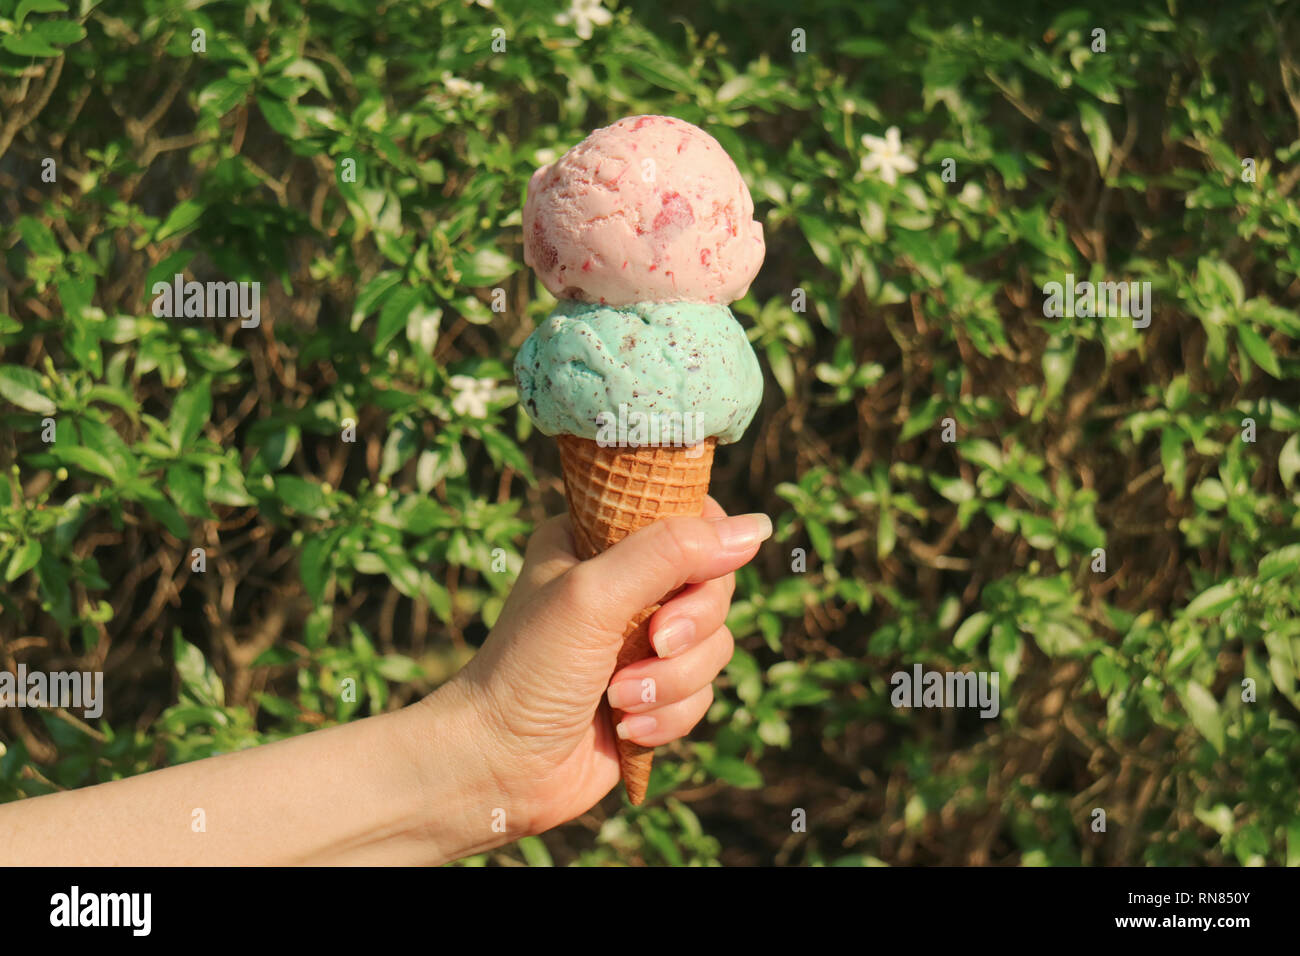 Hand holding an Ice cream cone with two scoops in the sunlight against blurry flowering tree Stock Photo